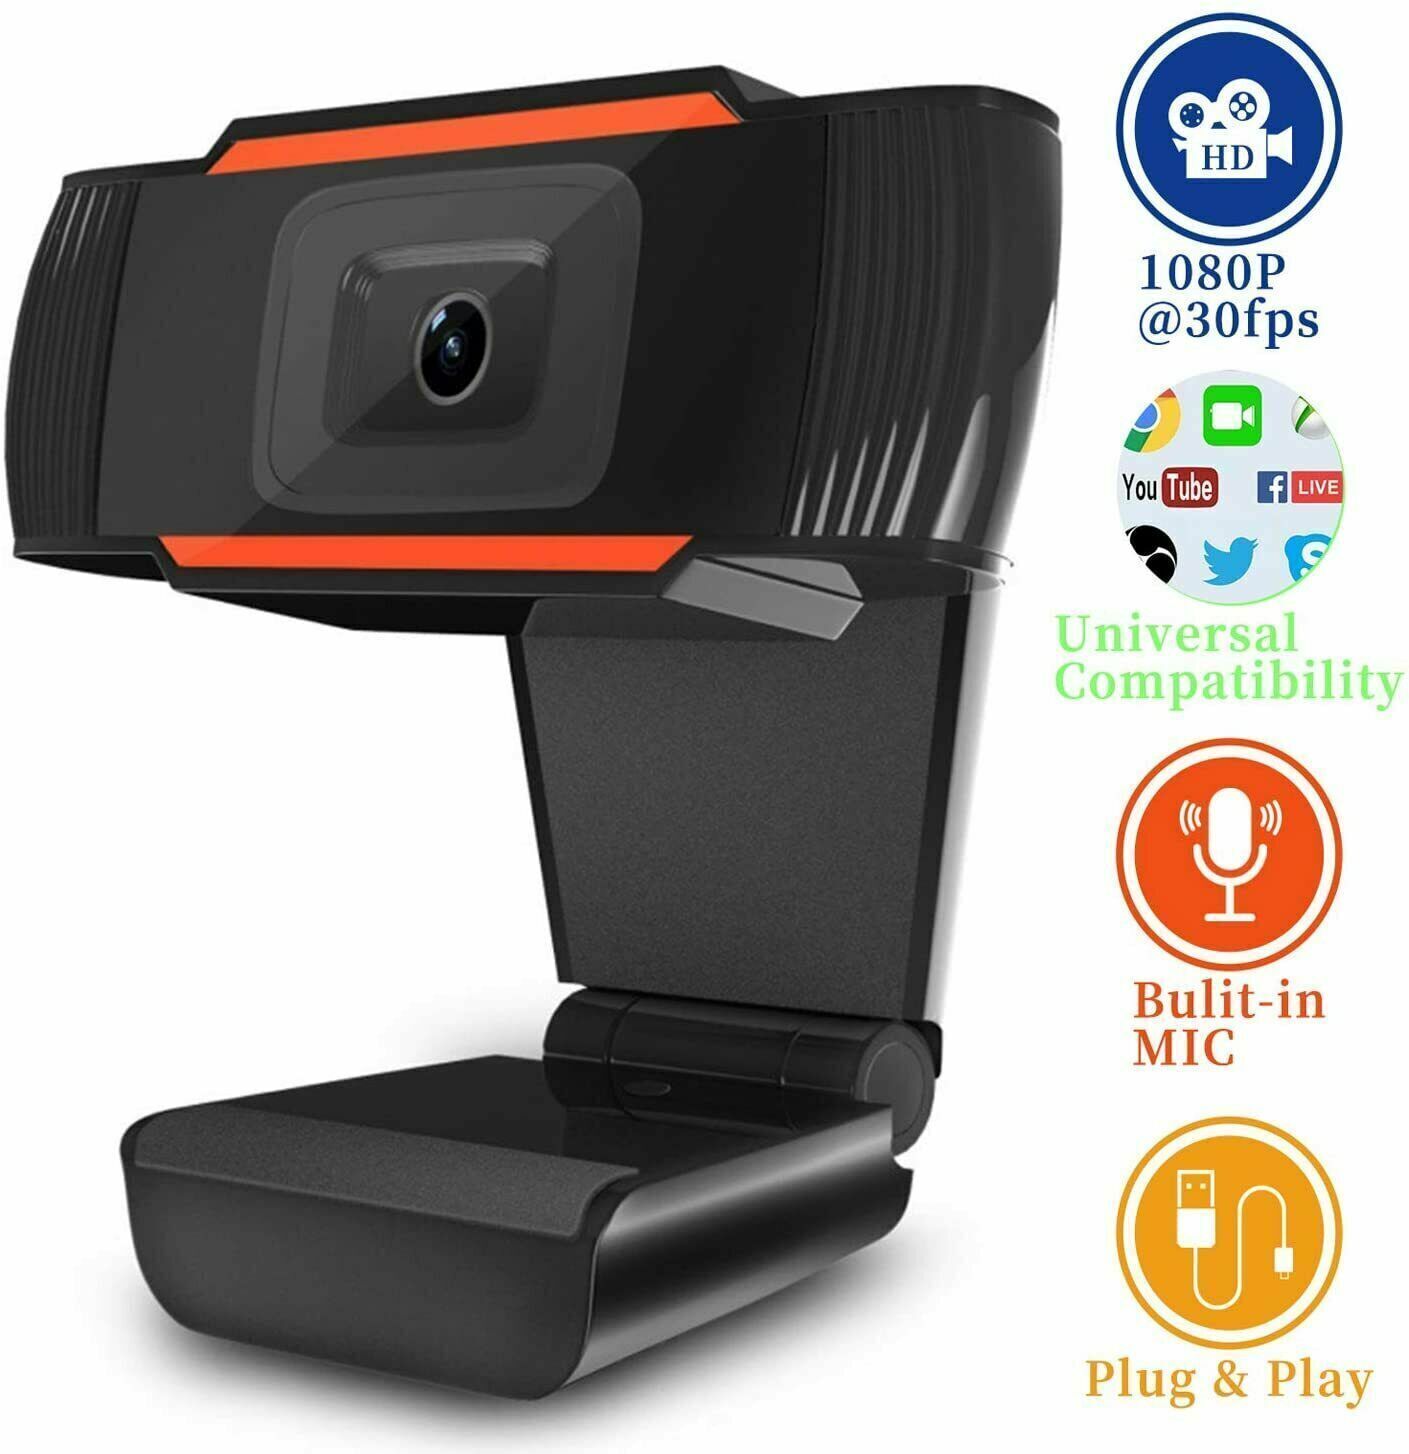 New 1080P Full HD USB Webcam Web Camera with Microphone for PC Desktop & Laptop